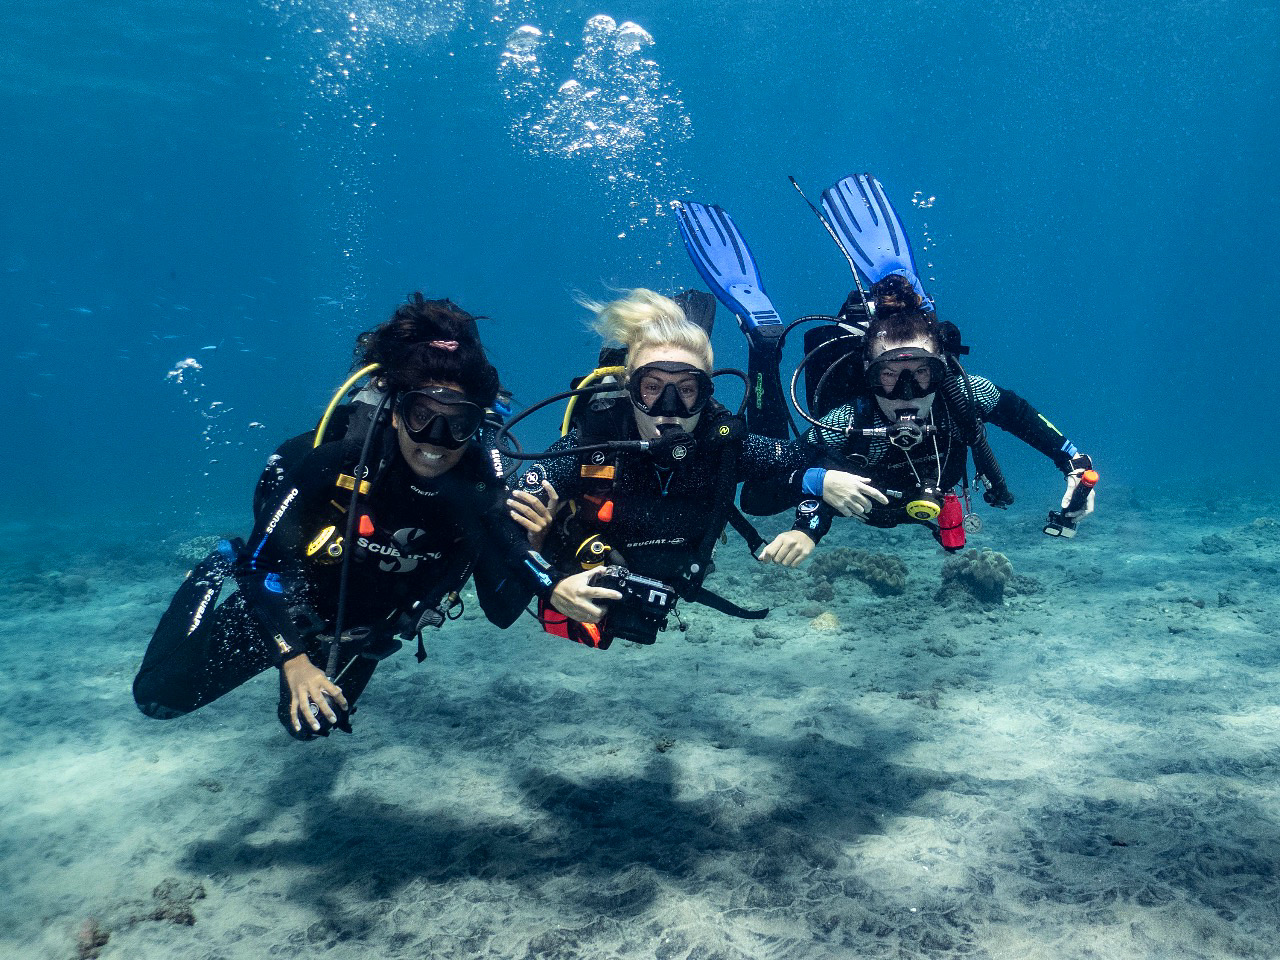 Dive buddies and friends for life!